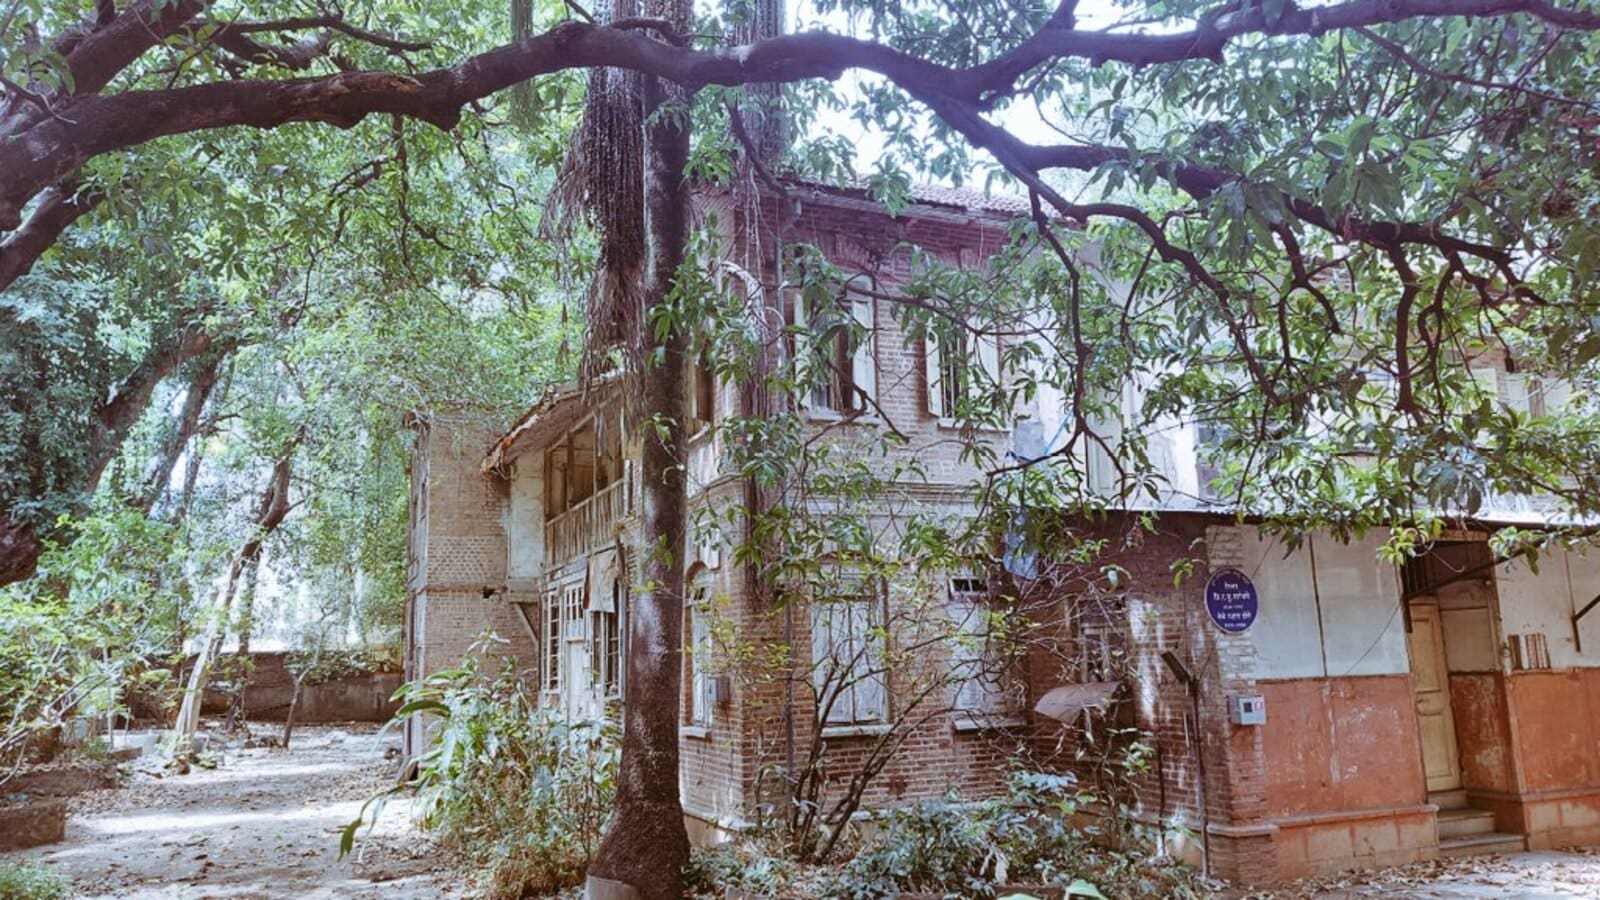 Proposed 5 storey bldg in place of Wrangler Paranjpye's bungalow will have  mathematics and statistics department - Hindustan Times